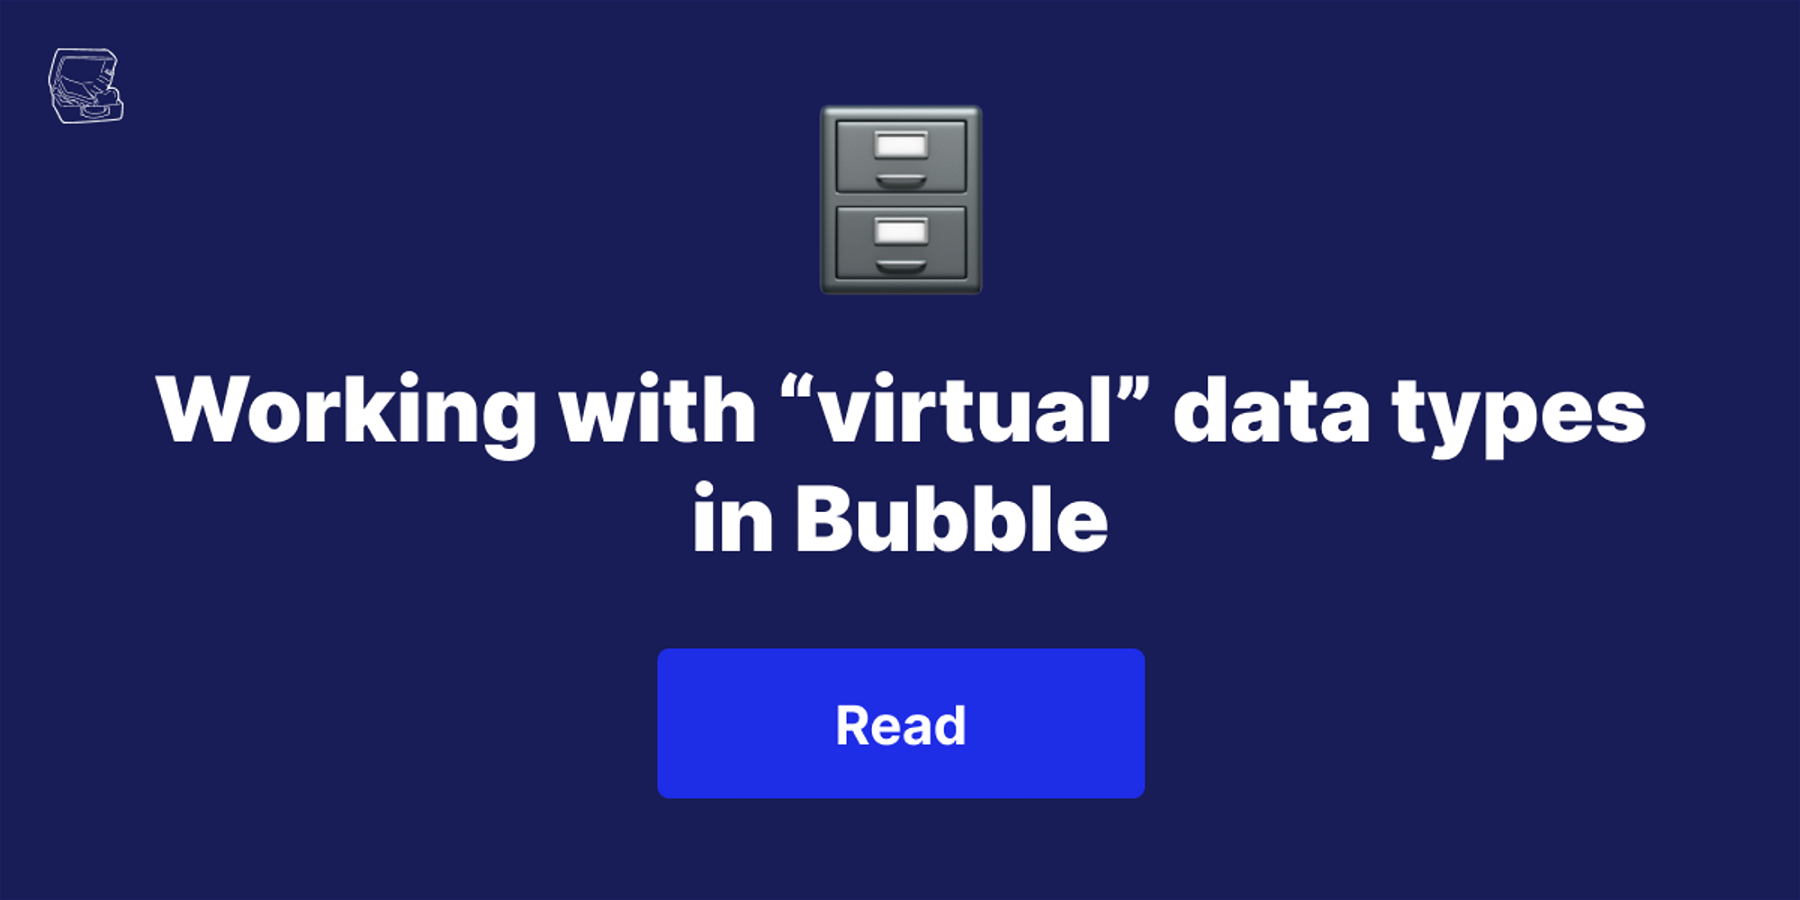 Working with “virtual” data types in Bubble